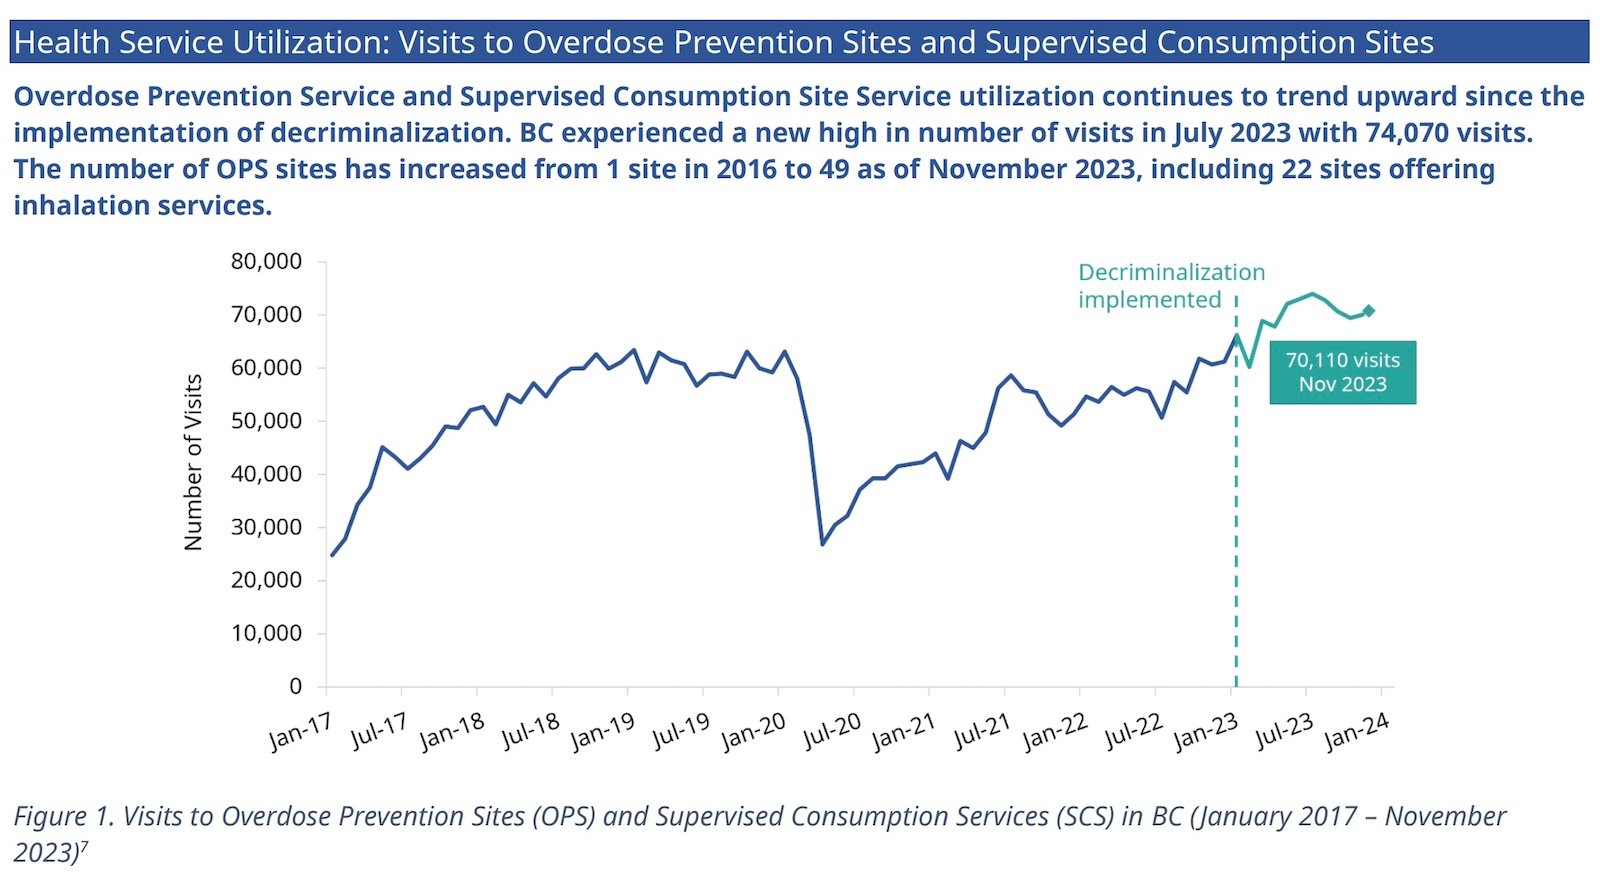 A line graph shows an increase in visits to overdose prevention sites after decriminalization.